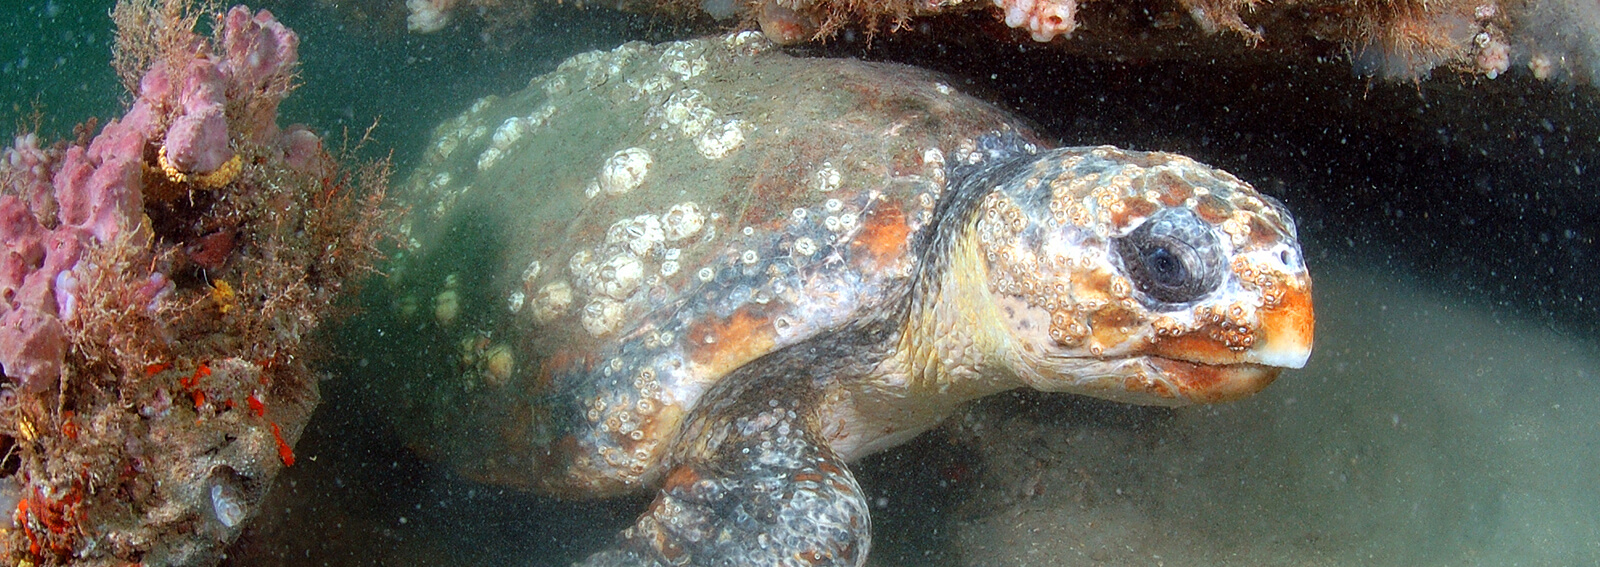 A seaturtle swims among corals